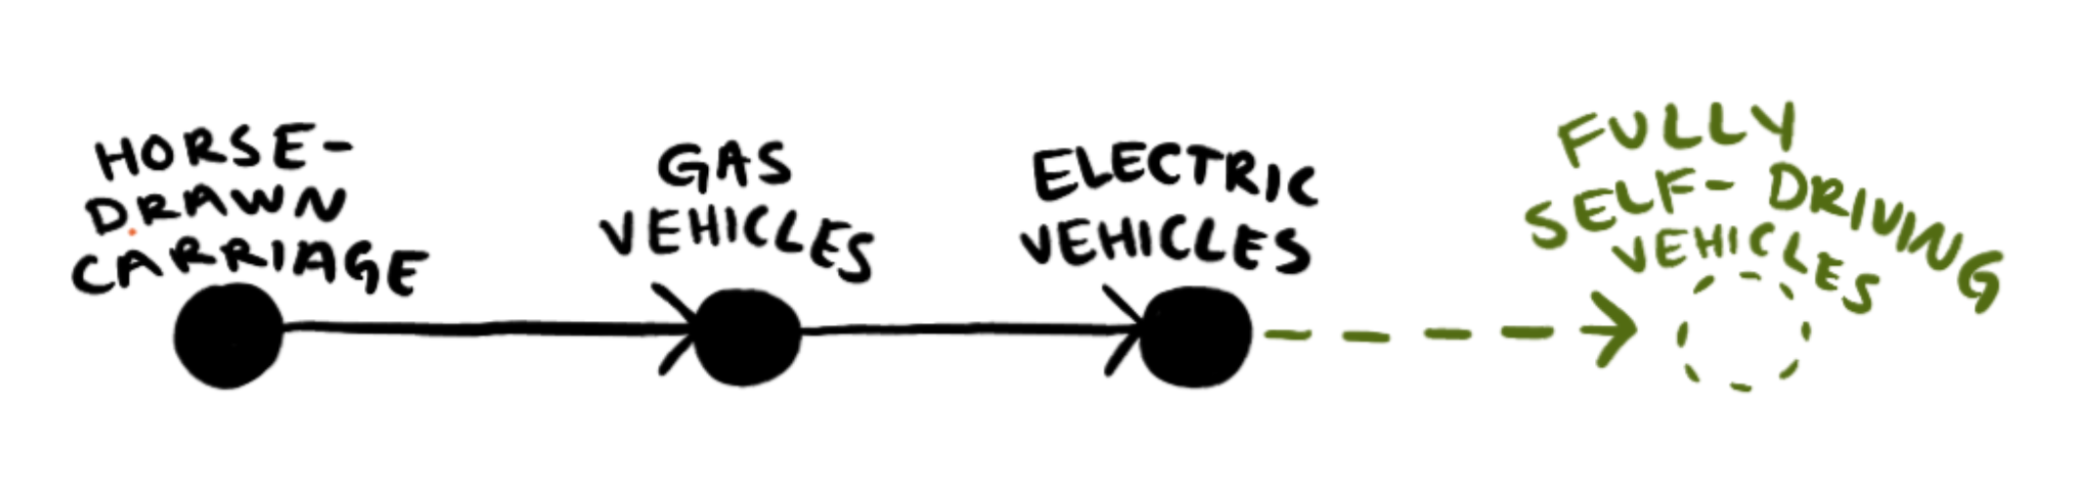 A series of labeled, filled-in circles with arrows pointing between them, much like a timeline. The circles are labeled, in order, "horse-drawn carriage", "gas vehicles", "electric vehicles". At the end is a dashed arrow and circle that is not filled in, labeled "fully self-driving vehicles".